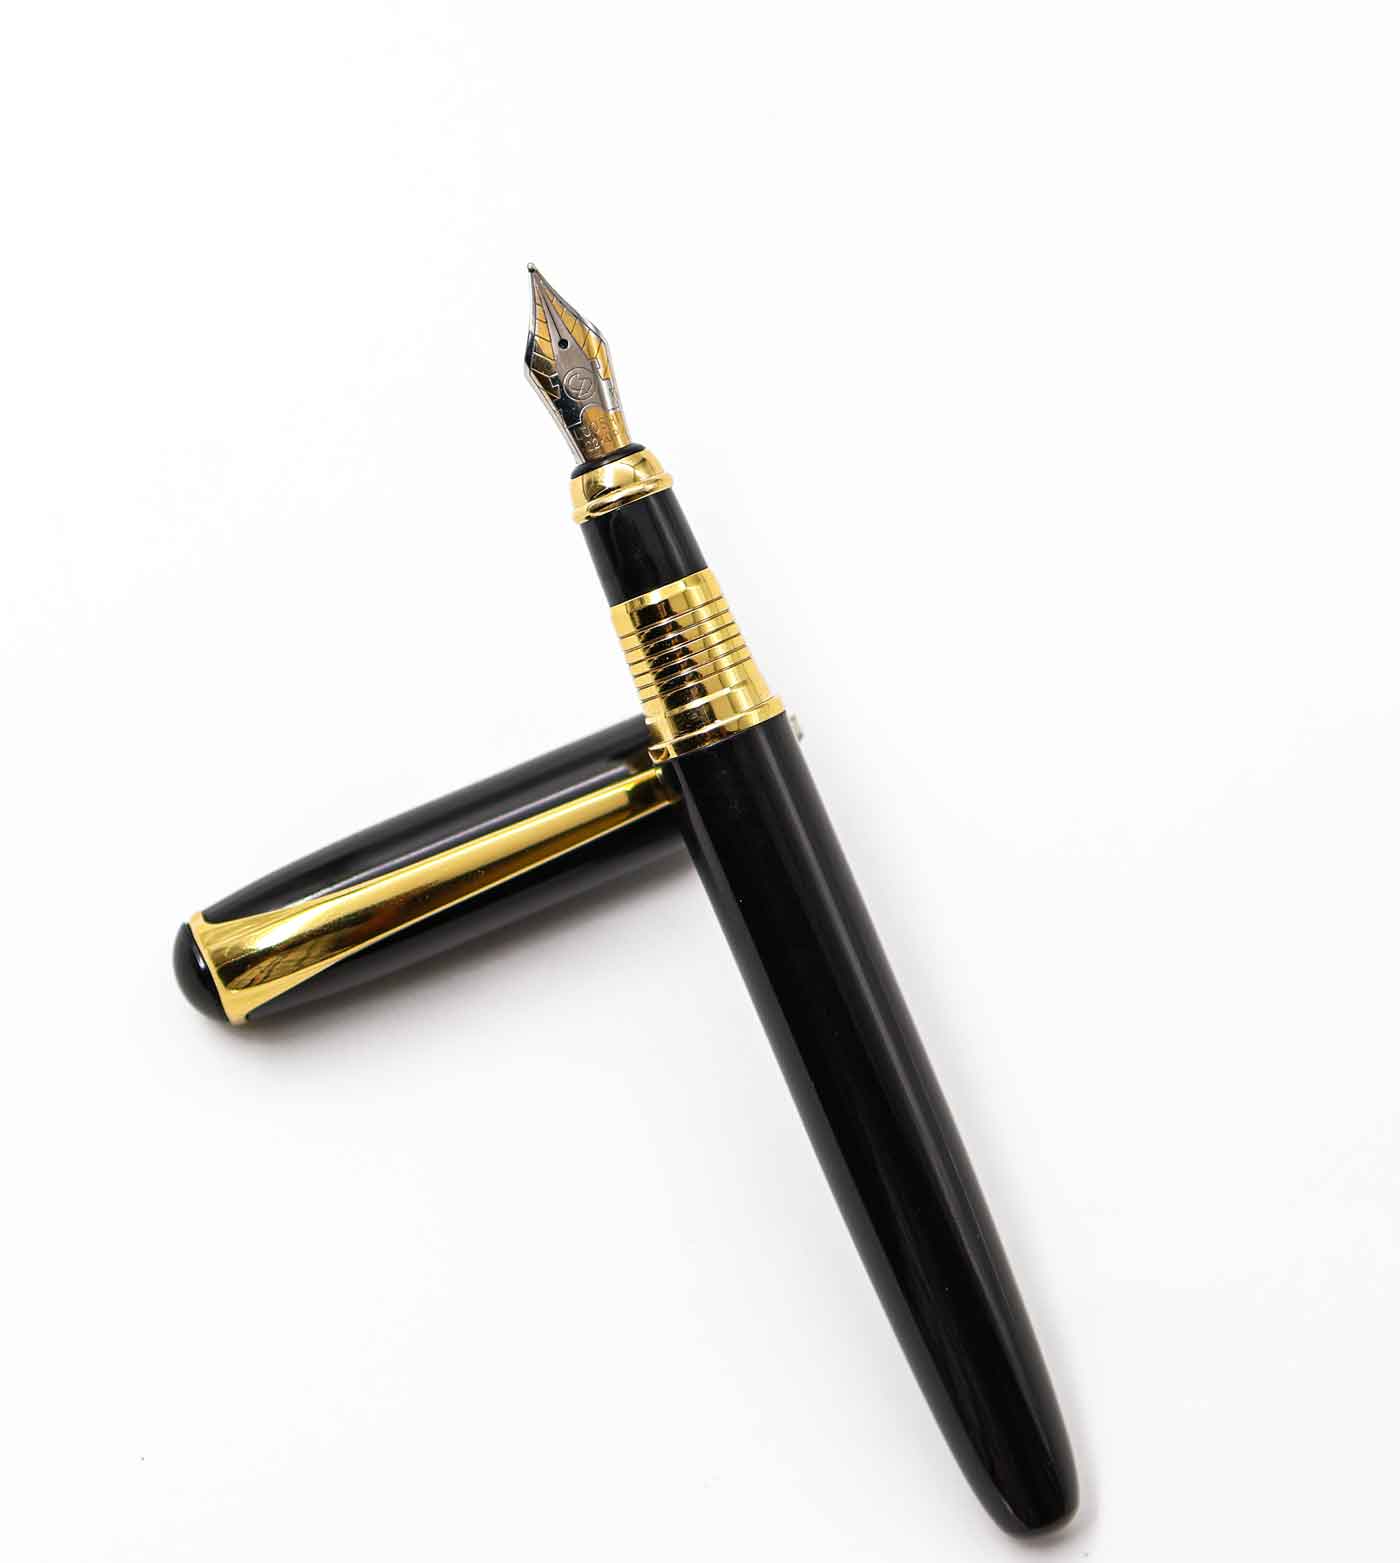 Luoshi 3335 Glossy Black Body With Gold Clip And Gold With Black Grip Medium Nib Converter Type Fountain Pen SKU 25188